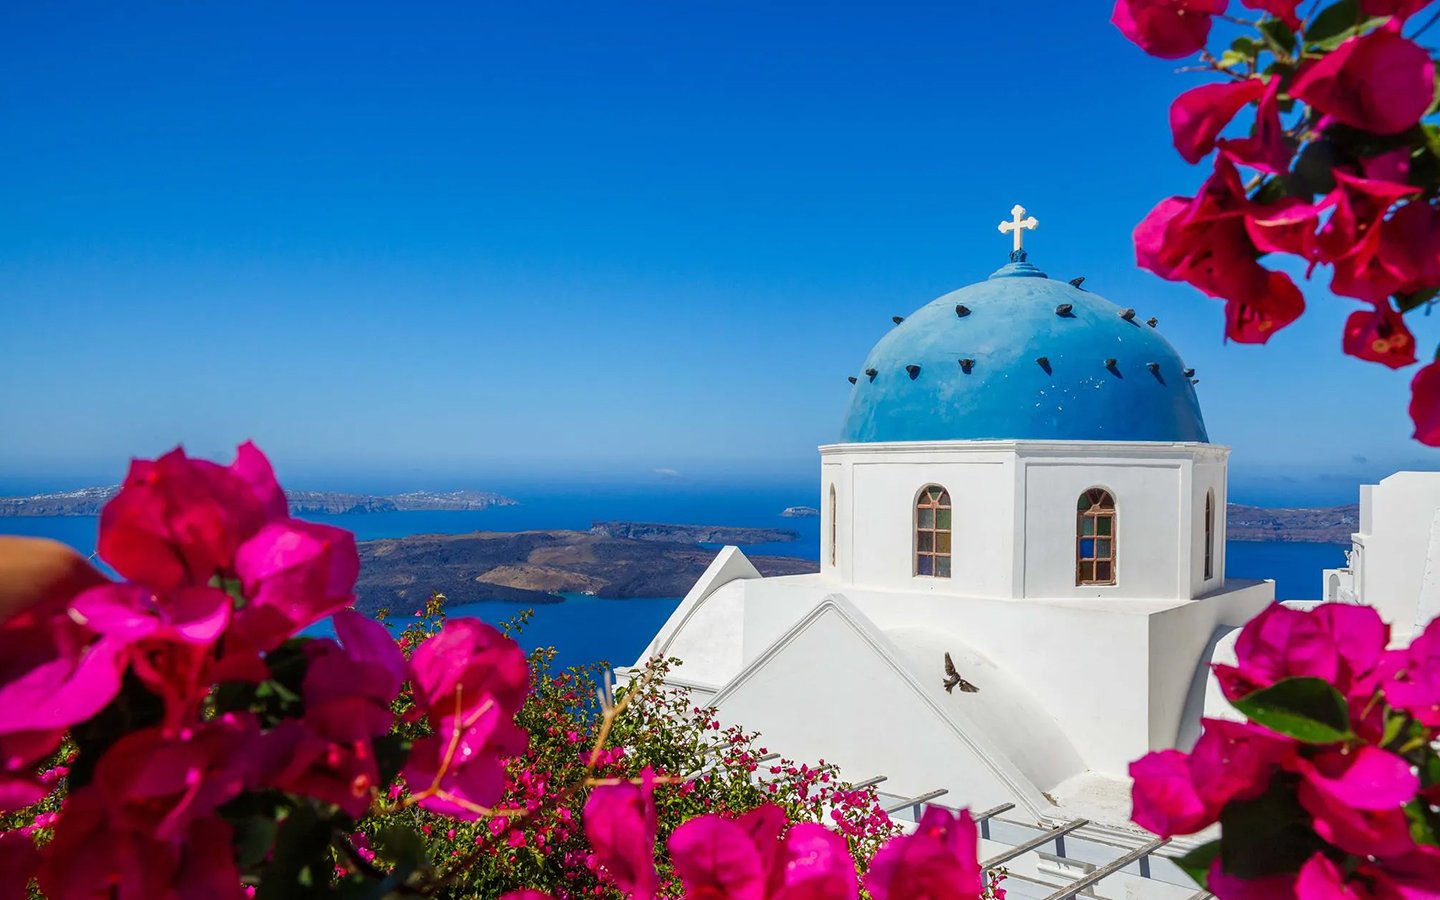 An iconic white-walled and blue-roofed house in Santorini seen on a cliffside with fushia bougainvillea in the foreground